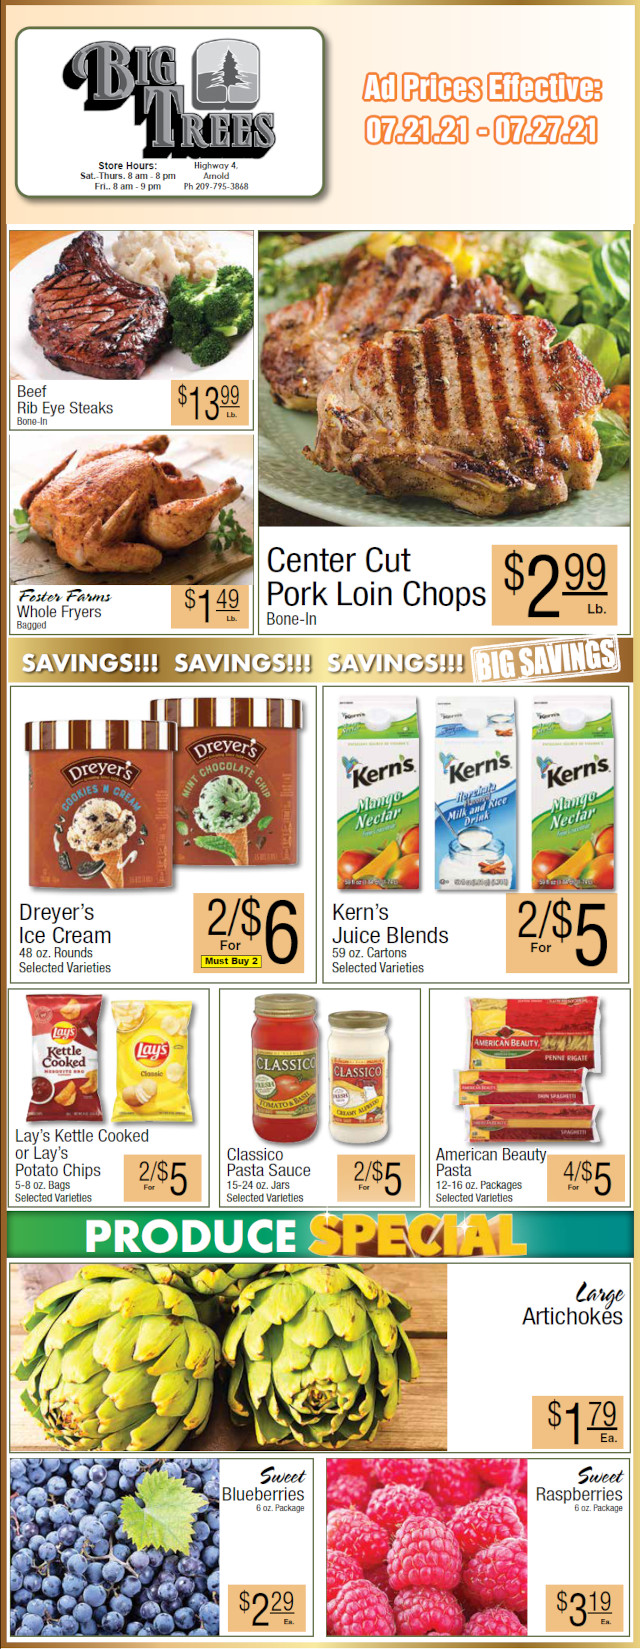 Big Trees Market Weekly Ad & Grocery Specials Through July 27th! Shop Local & Save!!